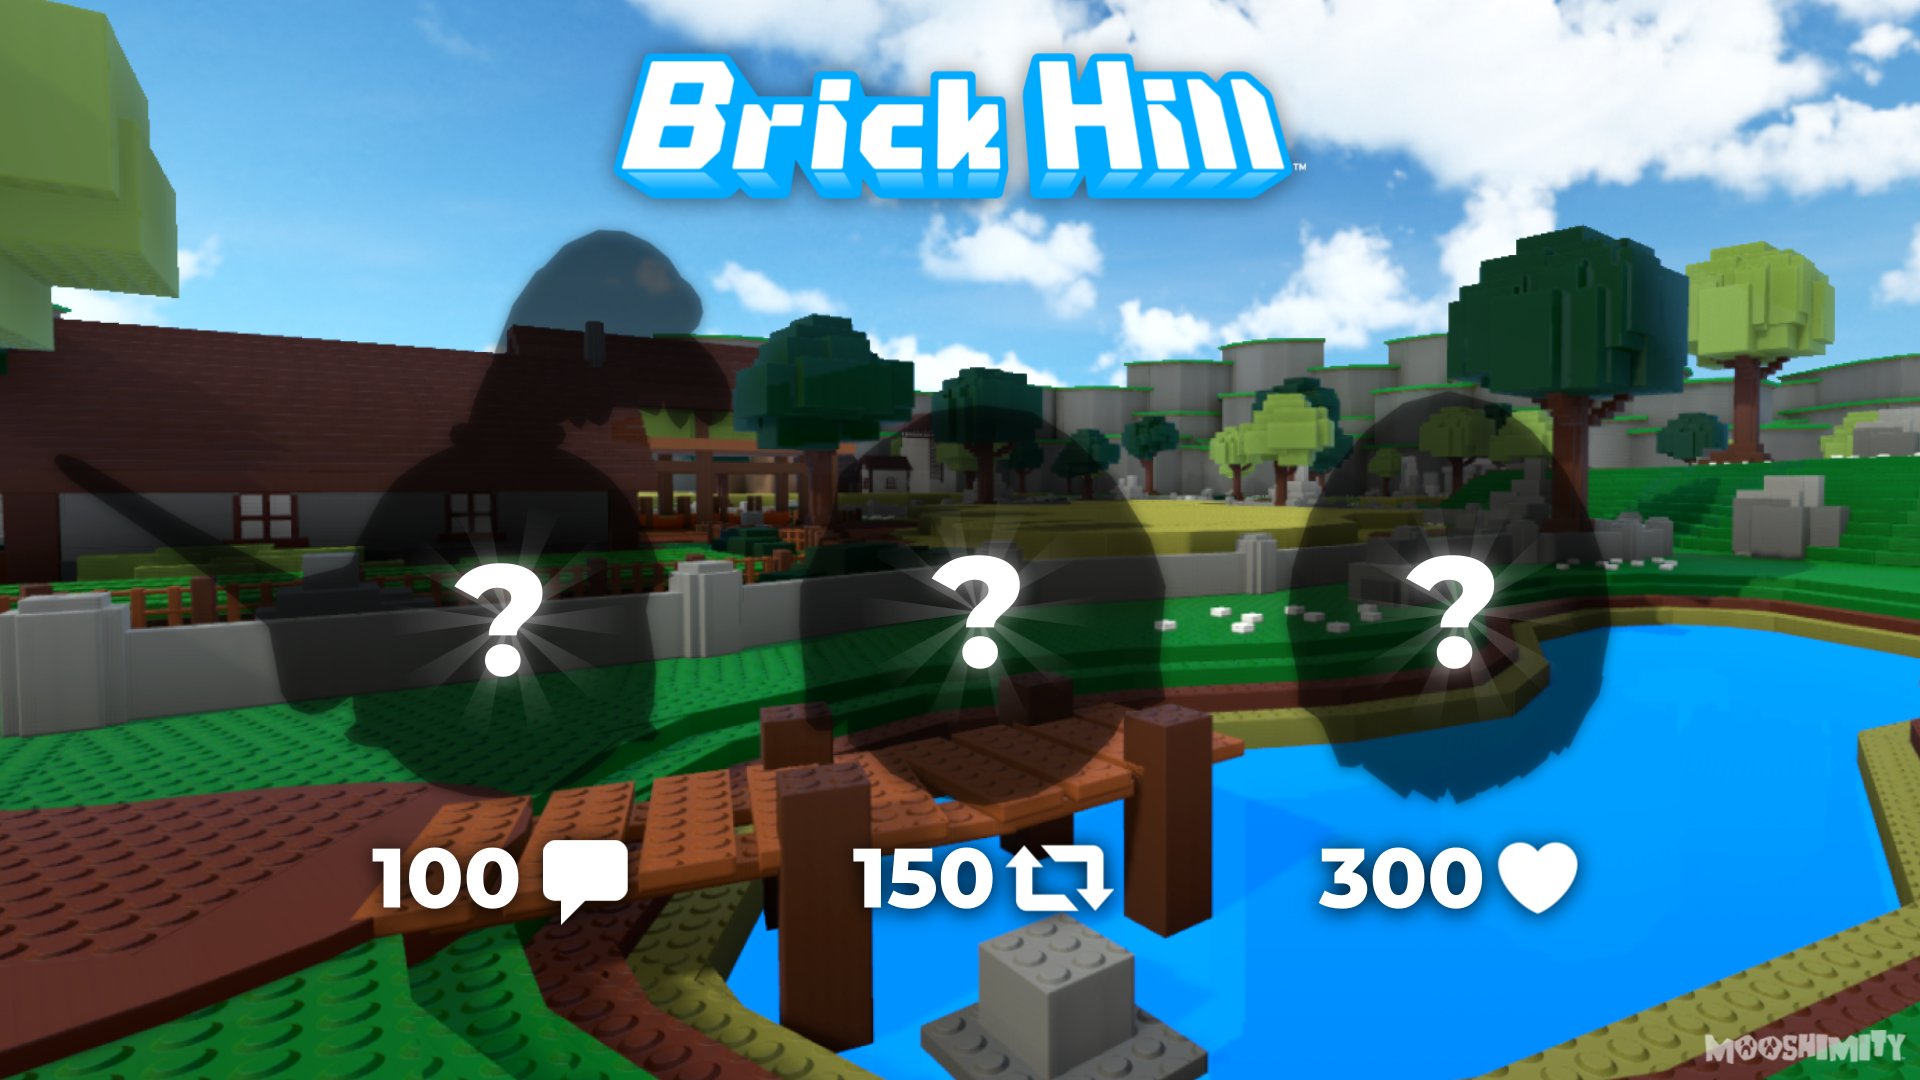 Brick Hill on X: The first Egg Hunt map is opening in less than